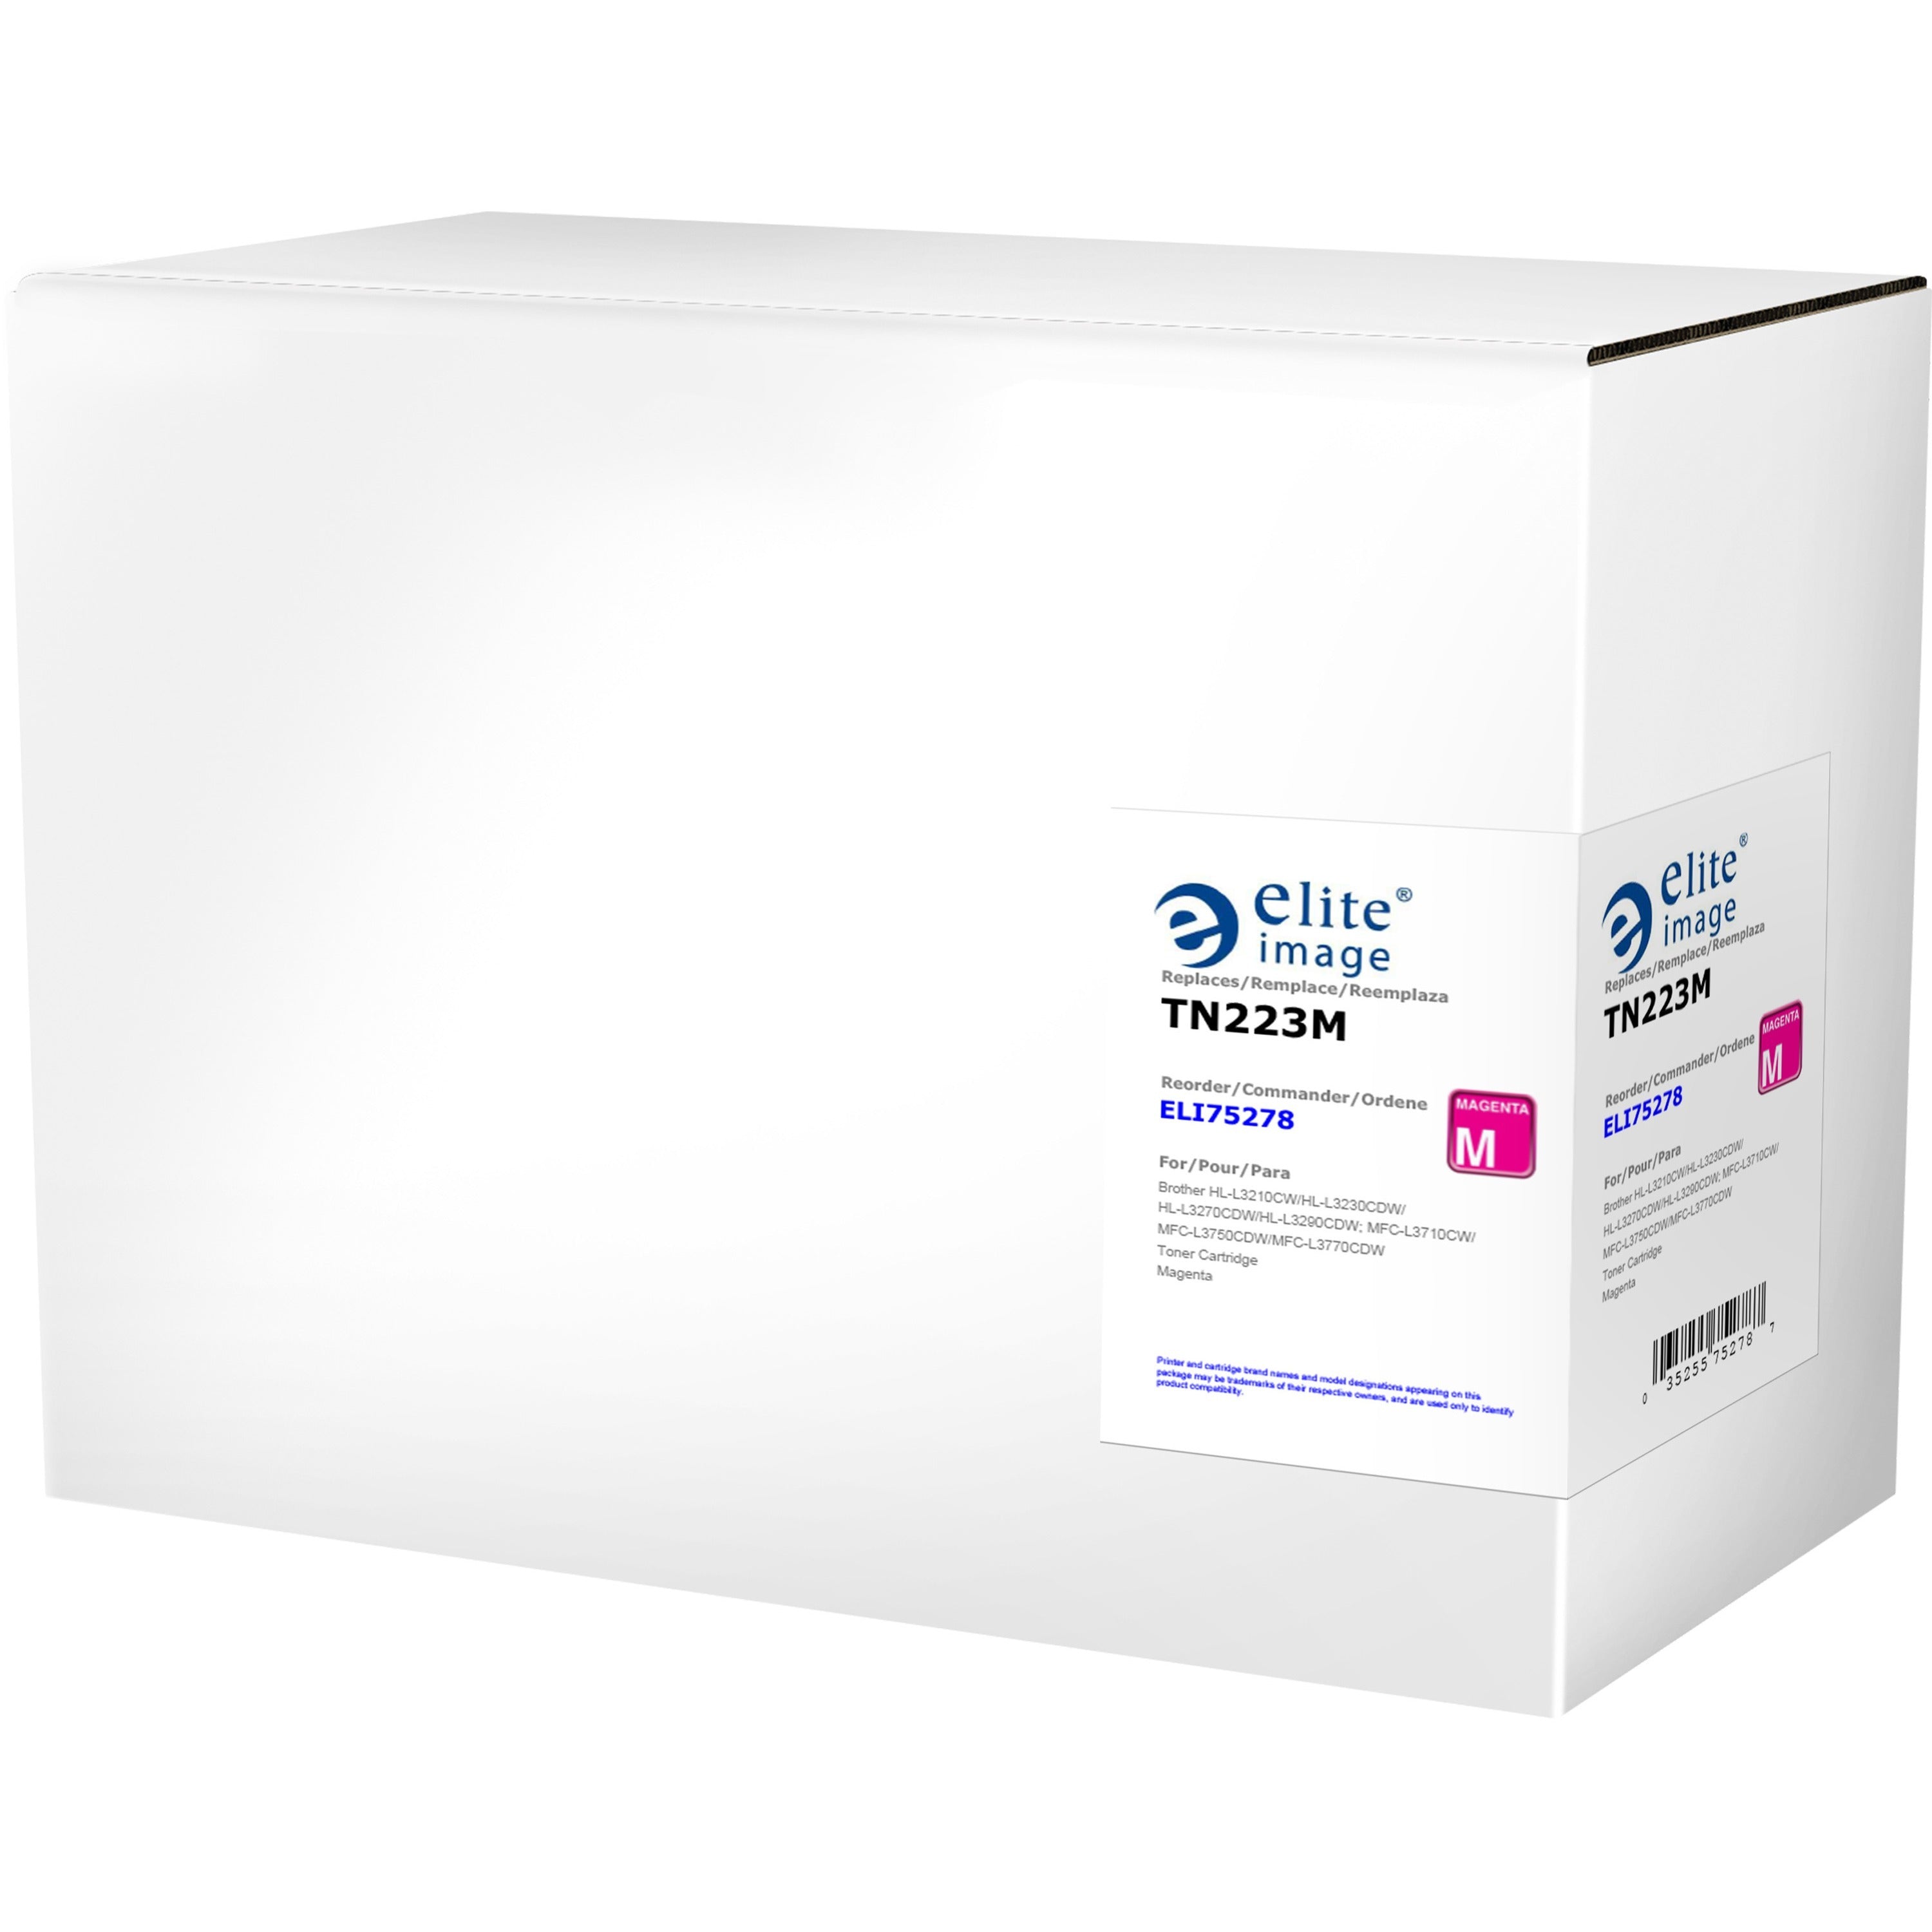 Elite Image Remanufactured Standard Yield Laser Toner Cartridge - Alternative for Brother TN223, TN227 - Magenta - 1 Each - 1300 Pages